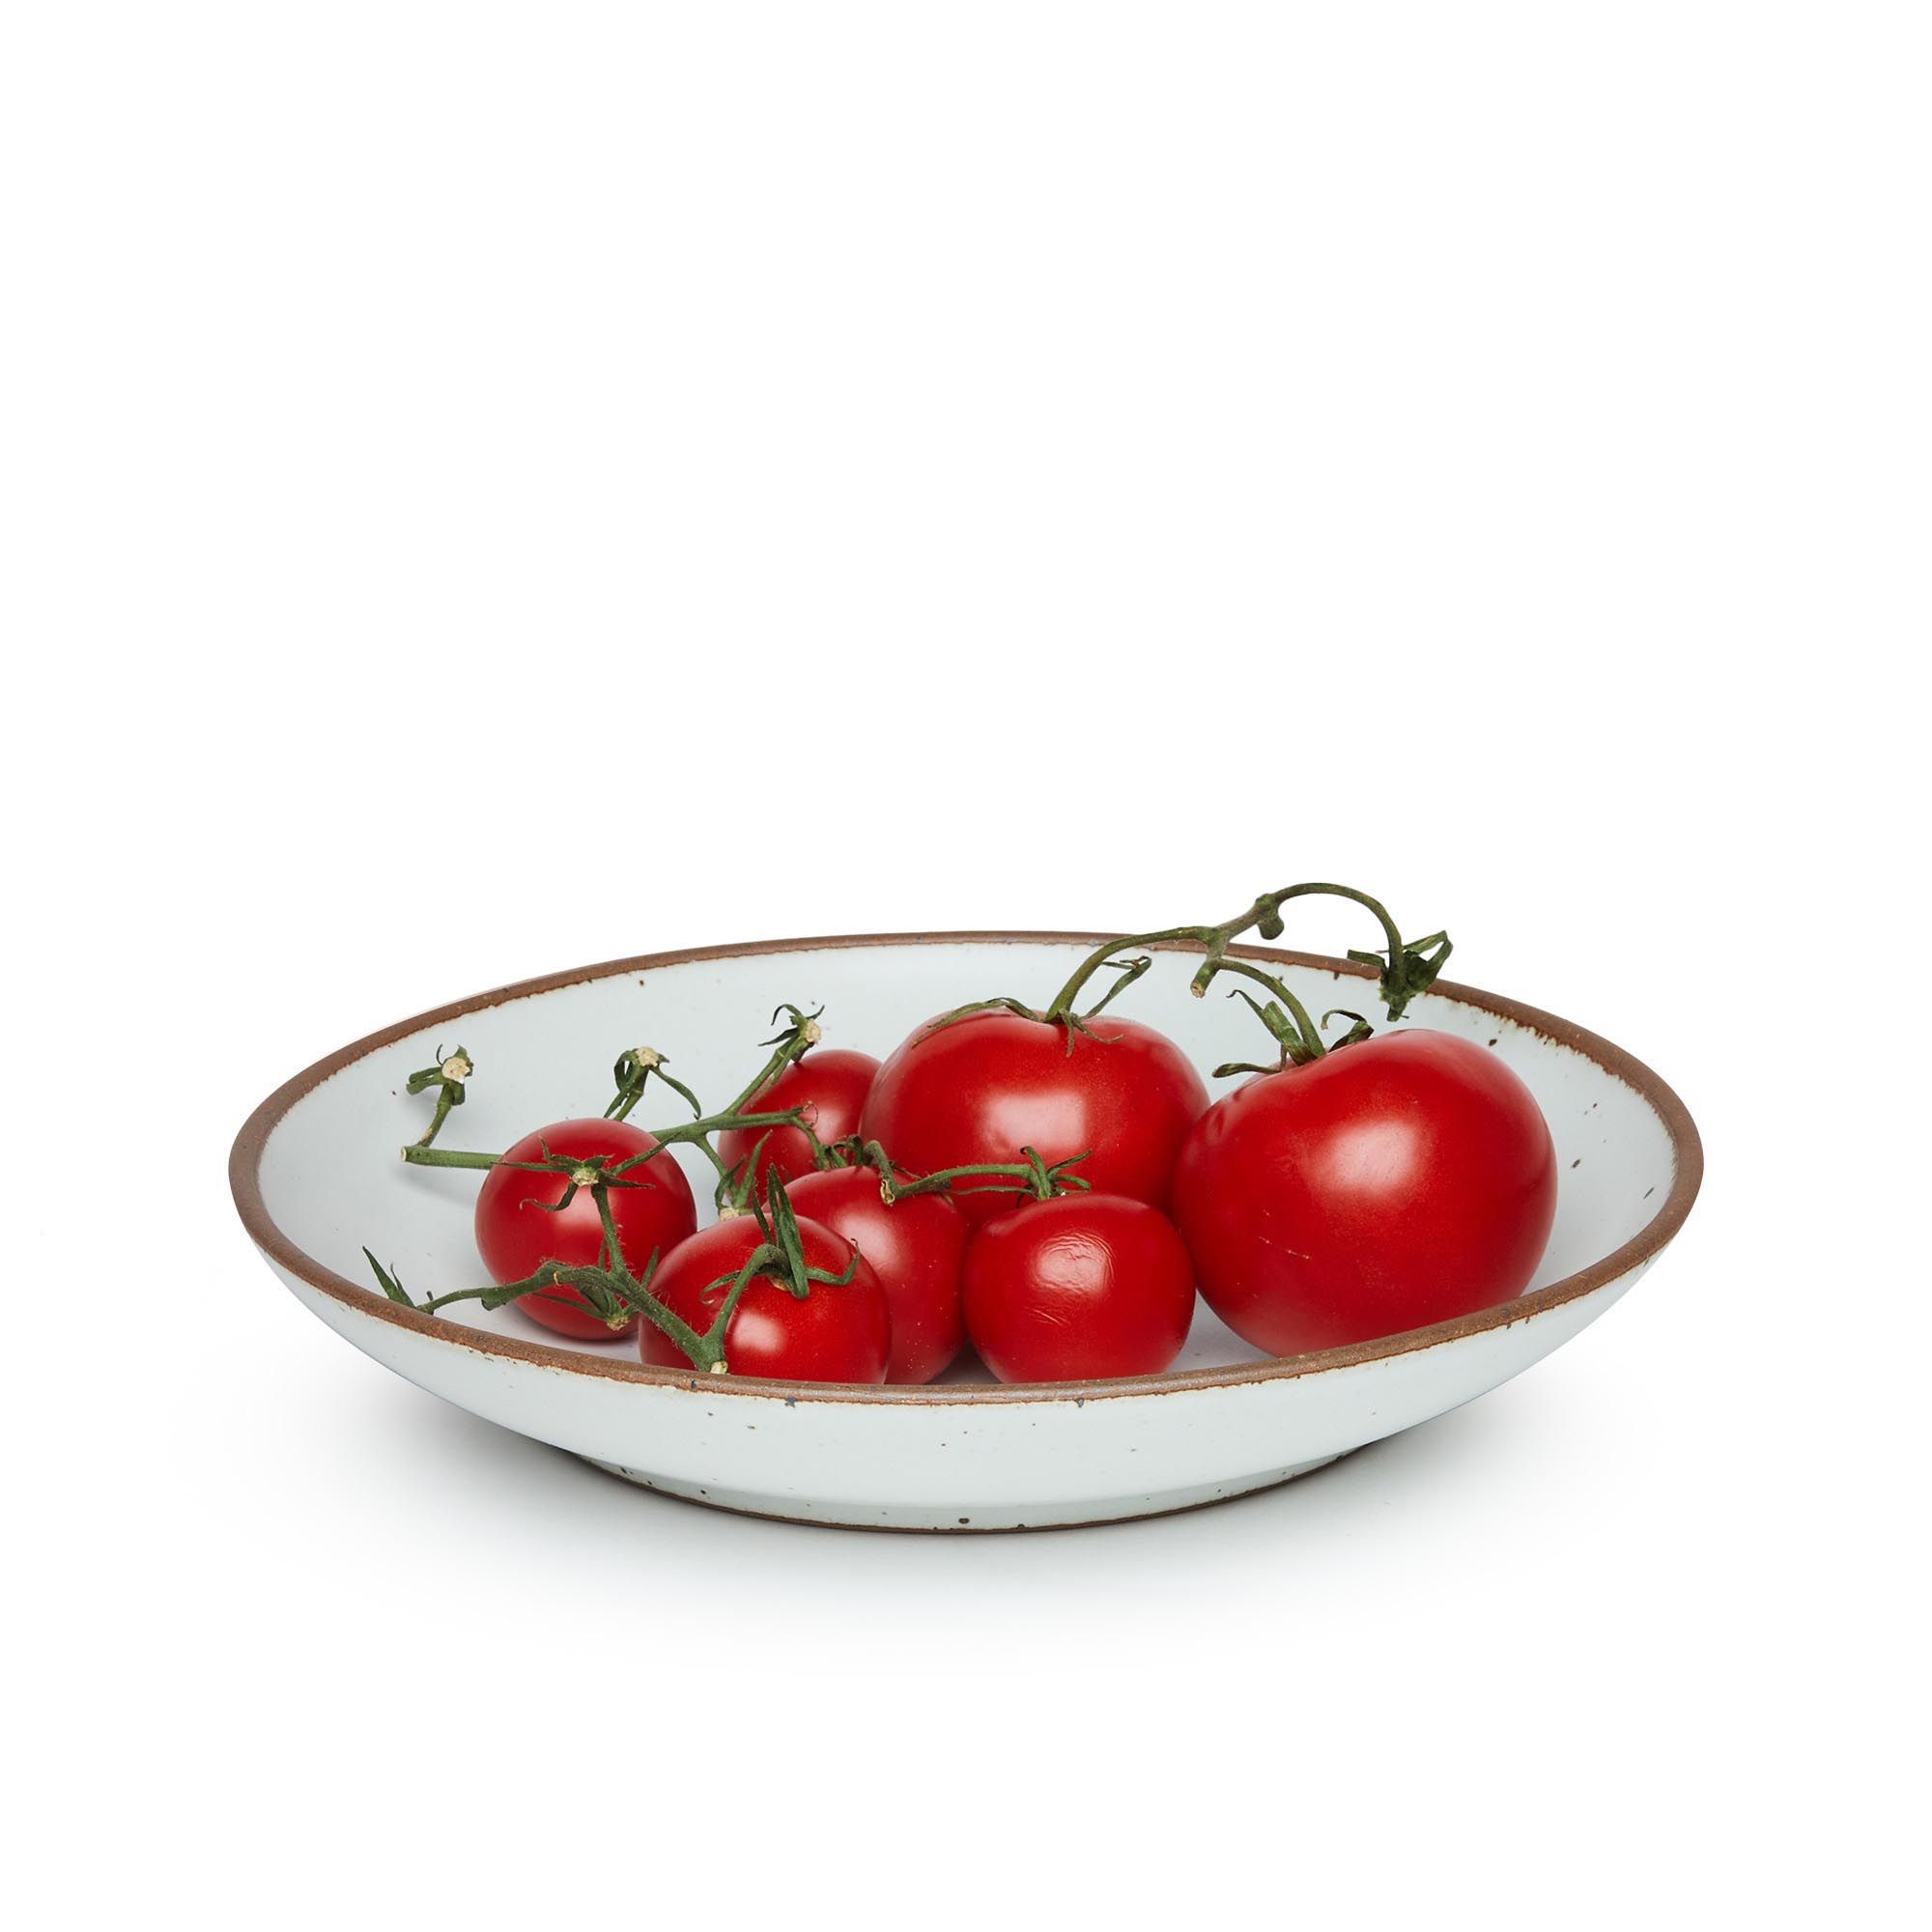 Tomatoes on a large ceramic plate with a curved bowl edge in a cool white color featuring iron speckles and an unglazed rim.